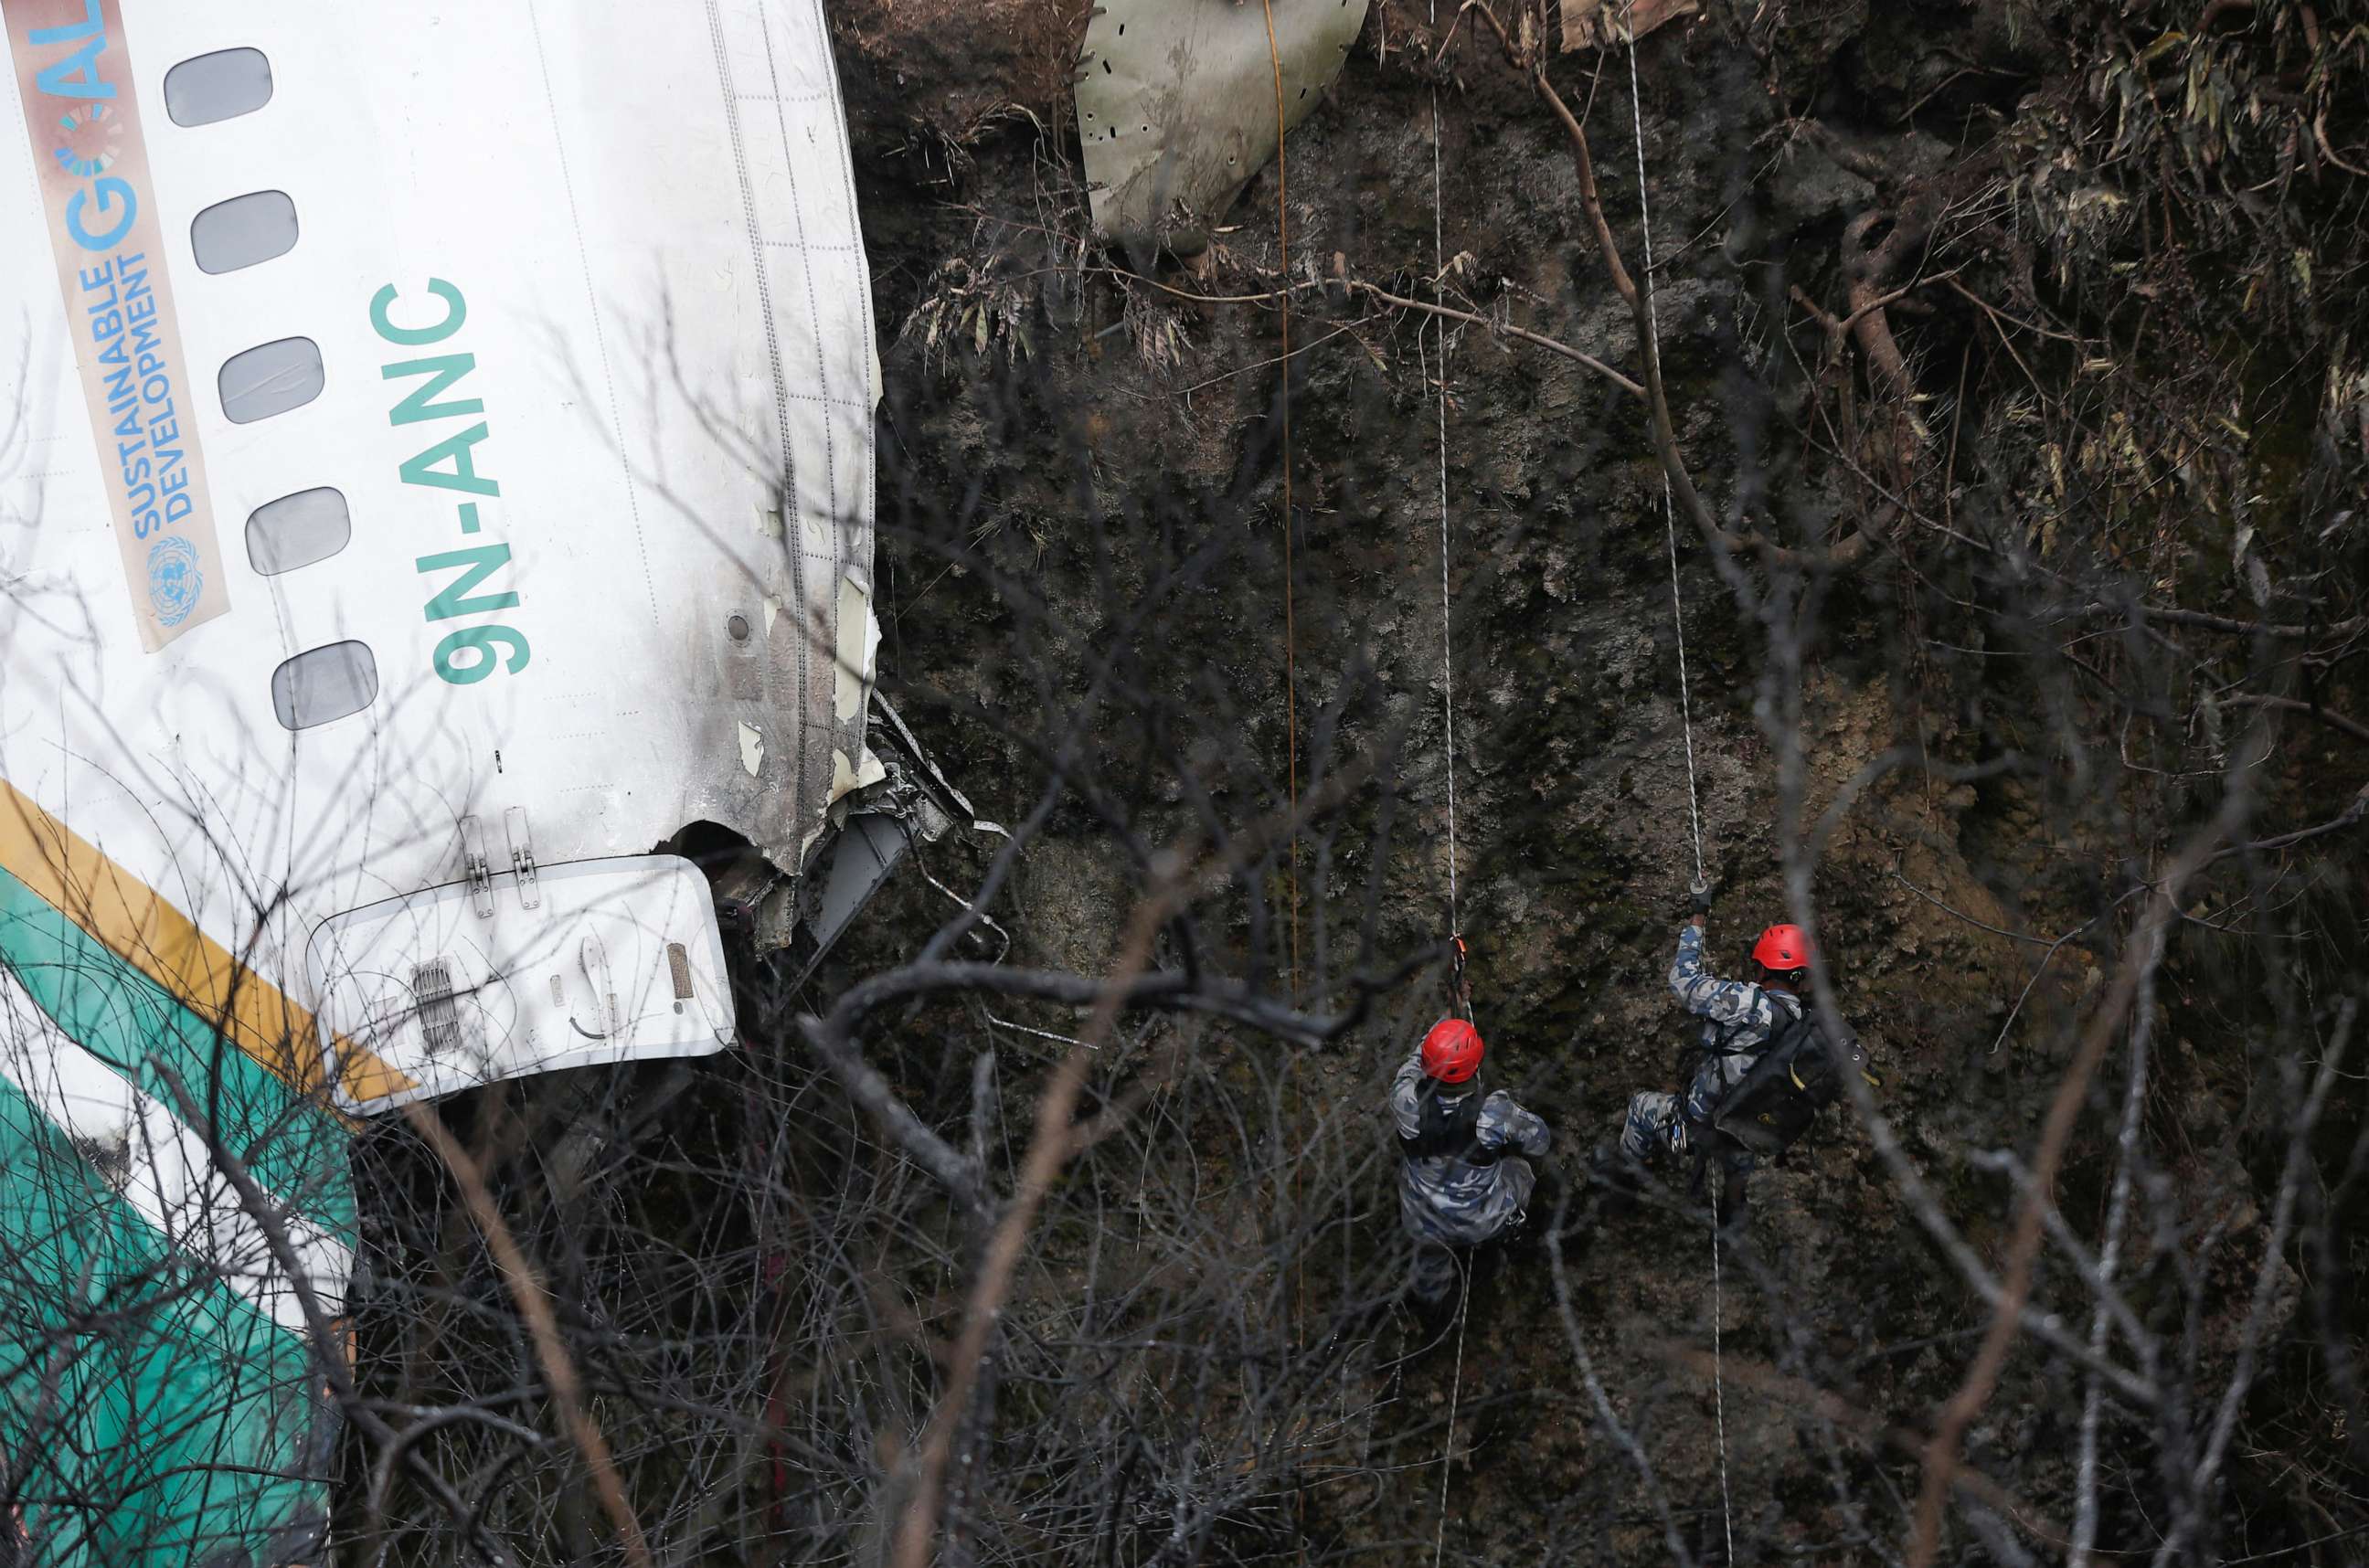 PHOTO: A rescue team works to recover victims from the site of the plane crash of a Yeti Airlines aircraft, in Pokhara, Nepal, Jan. 16, 2023.